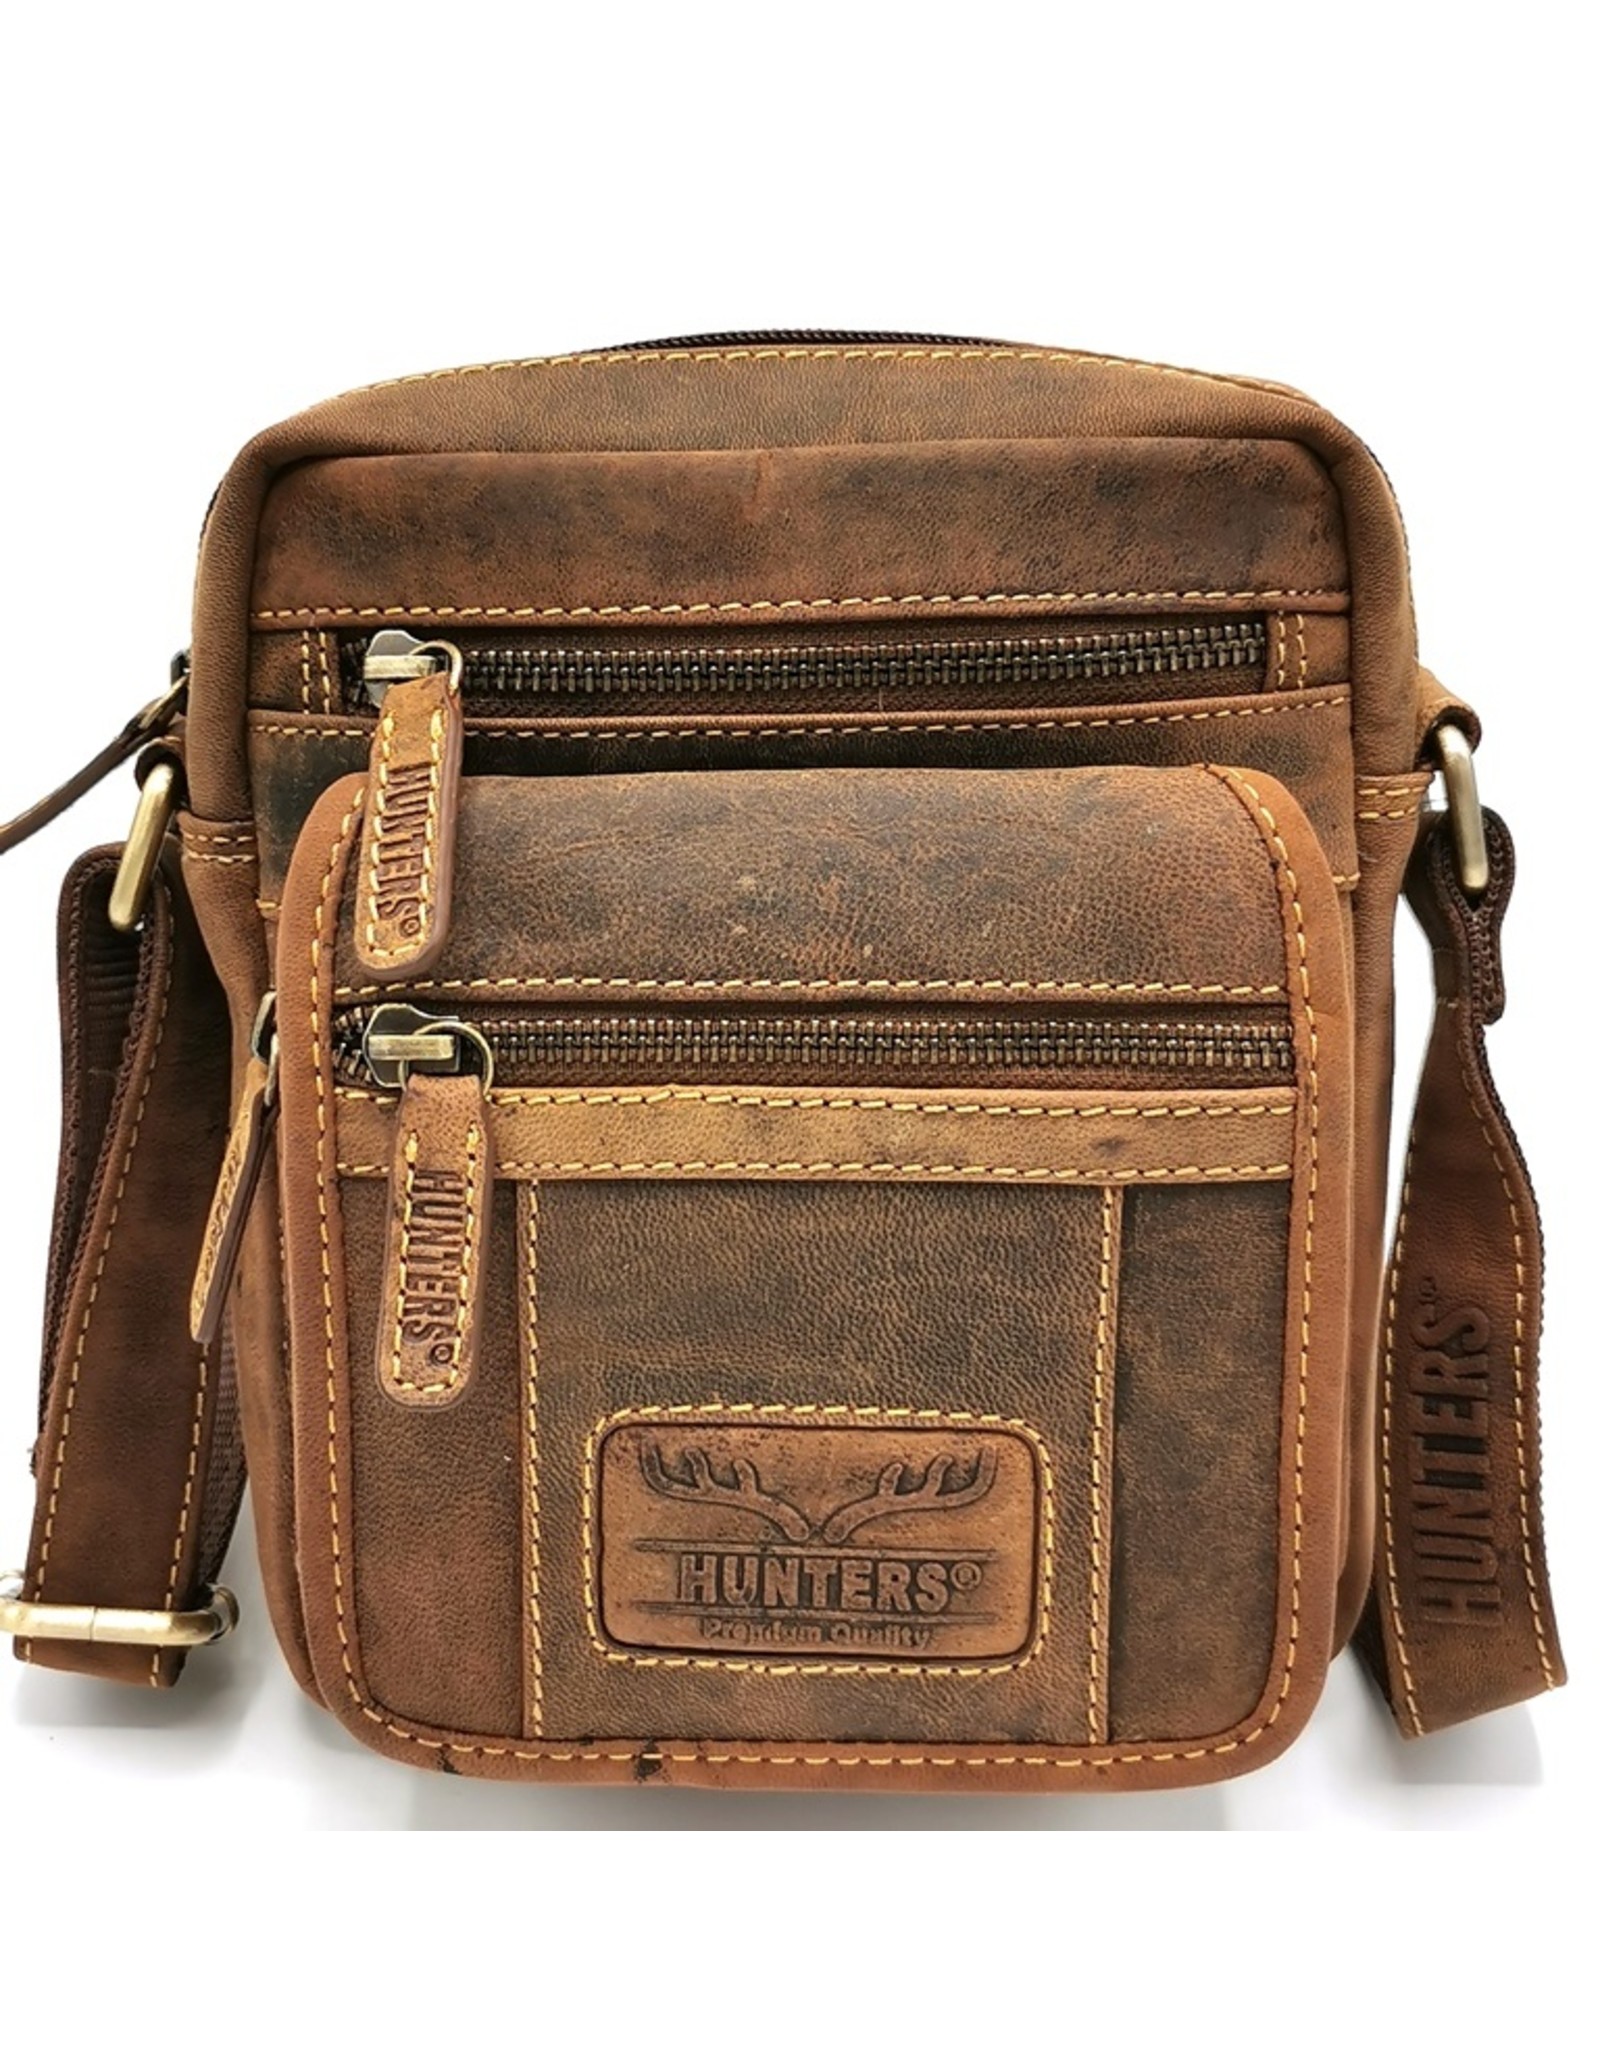 Hunters Leather Shoulder bags  Leather crossbody bags - Hunters shoulder bag with front pocket and cover small size